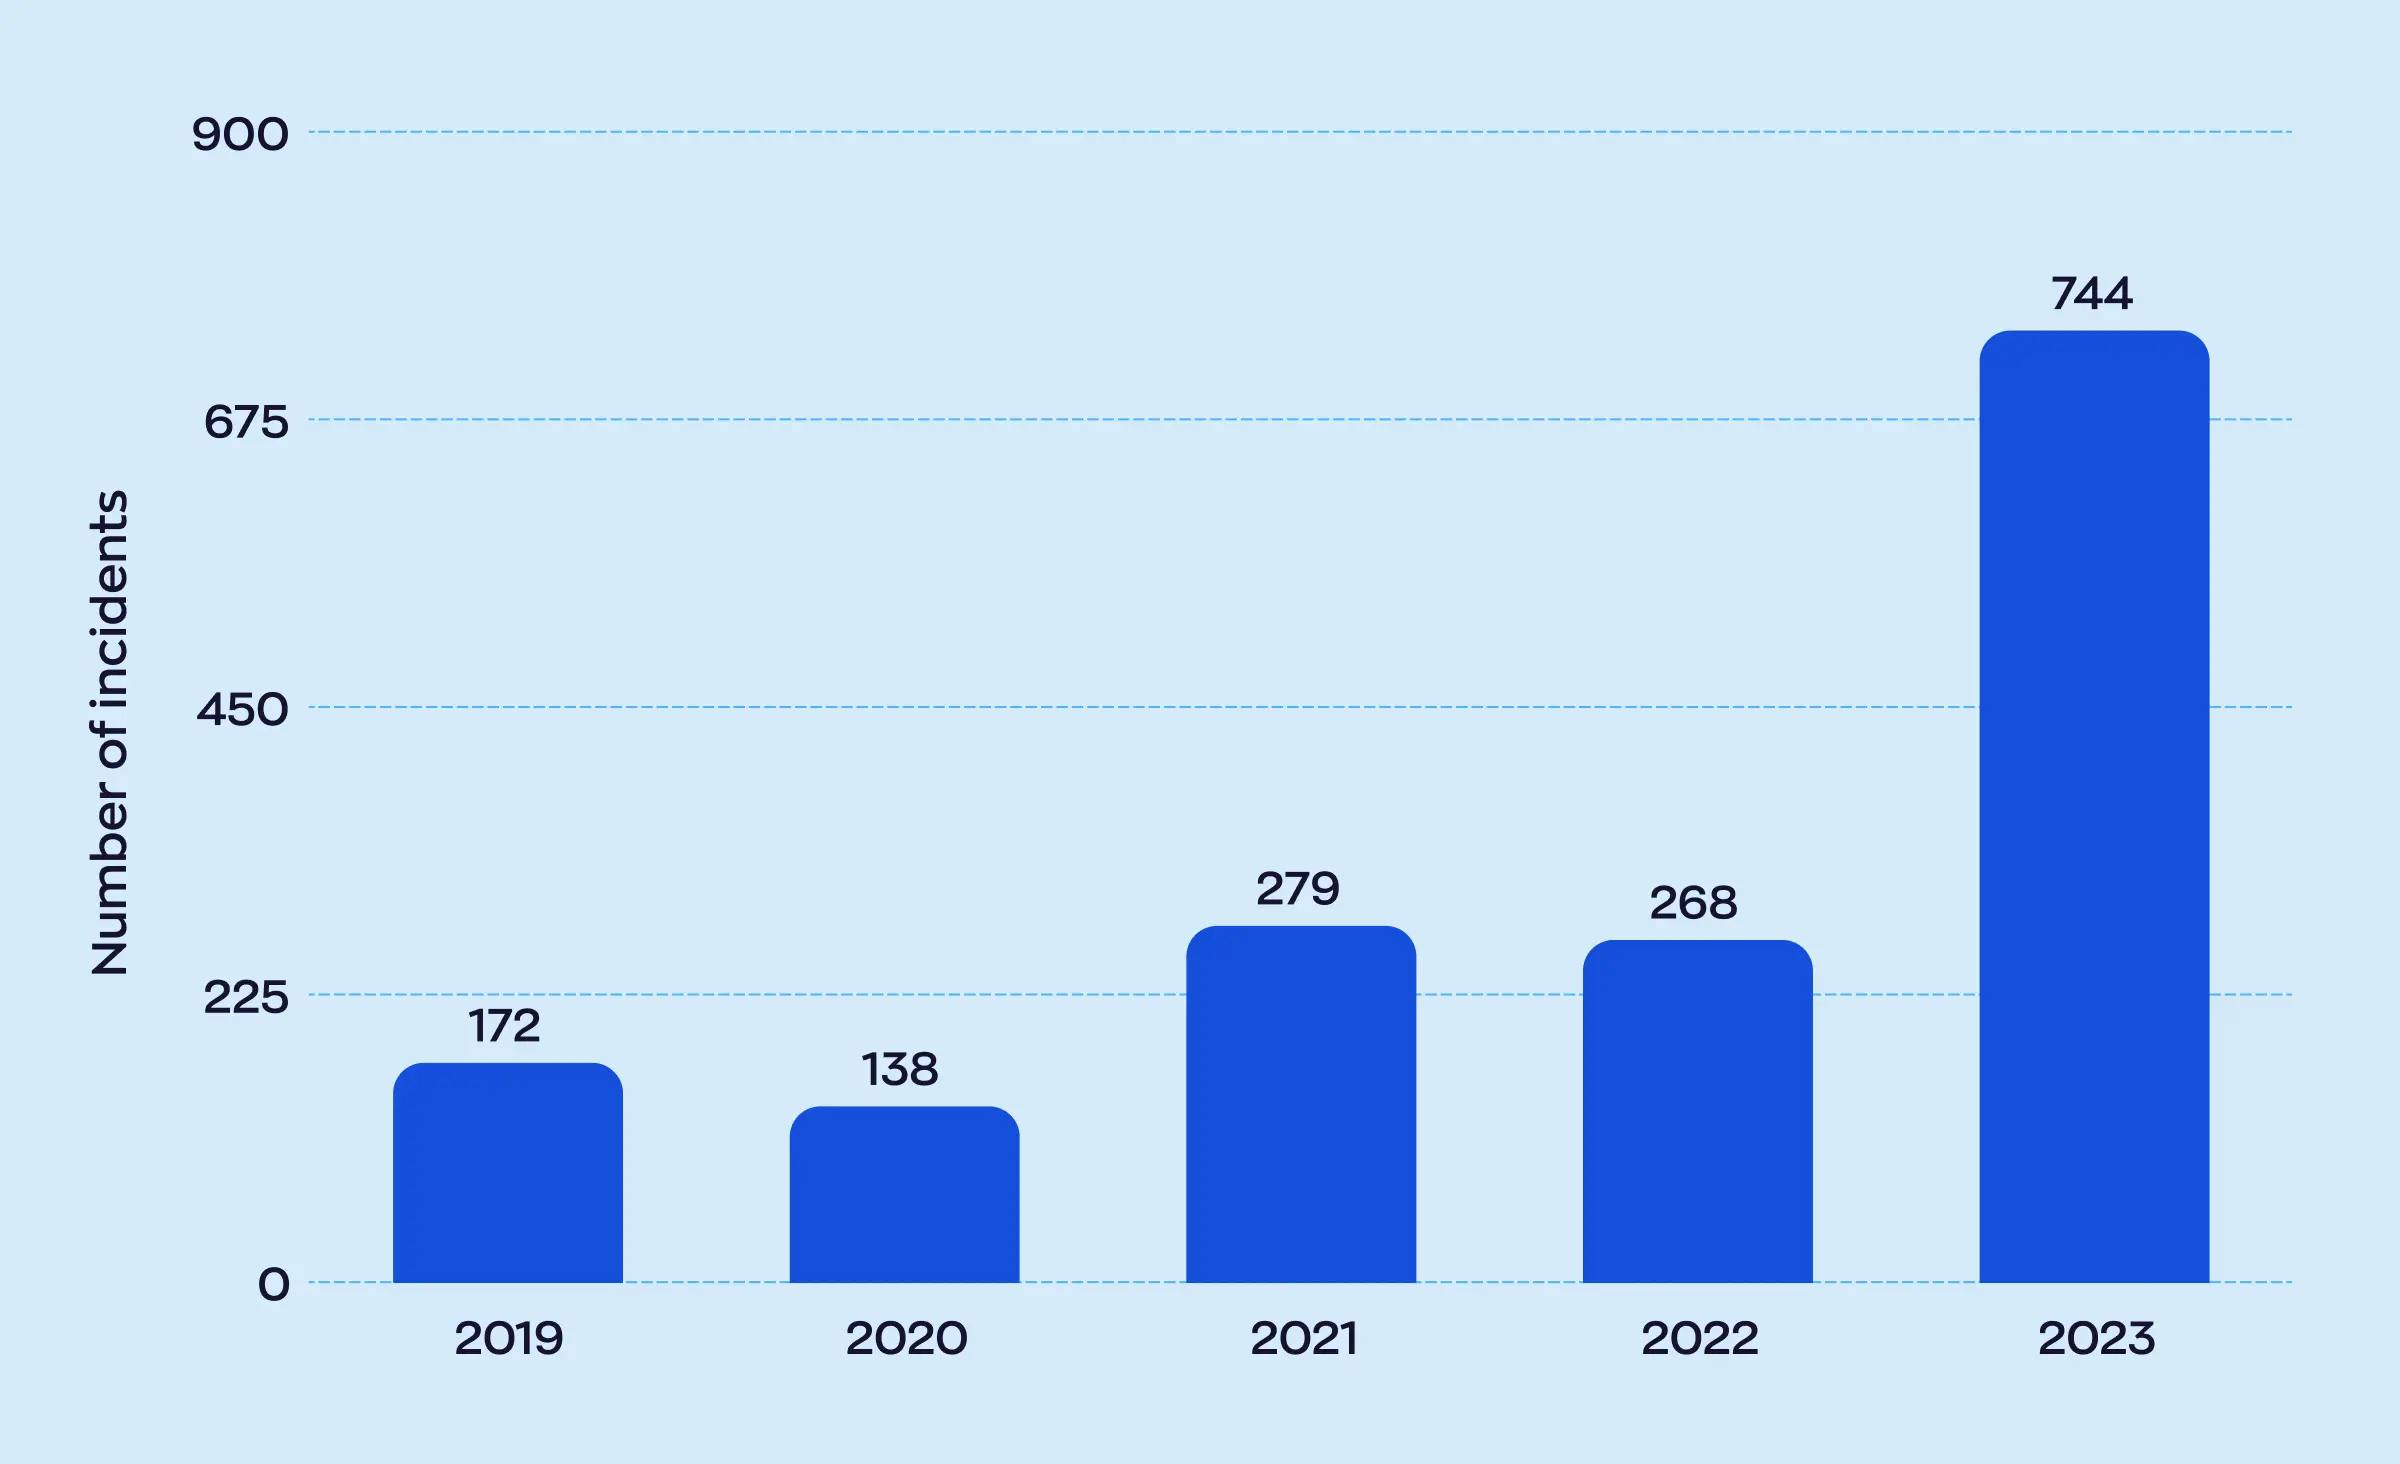 Number of data violation incidents in the US financial services industry, 2019-2023, with a sharp increase from 268 in 2022 to 744 in 2023.